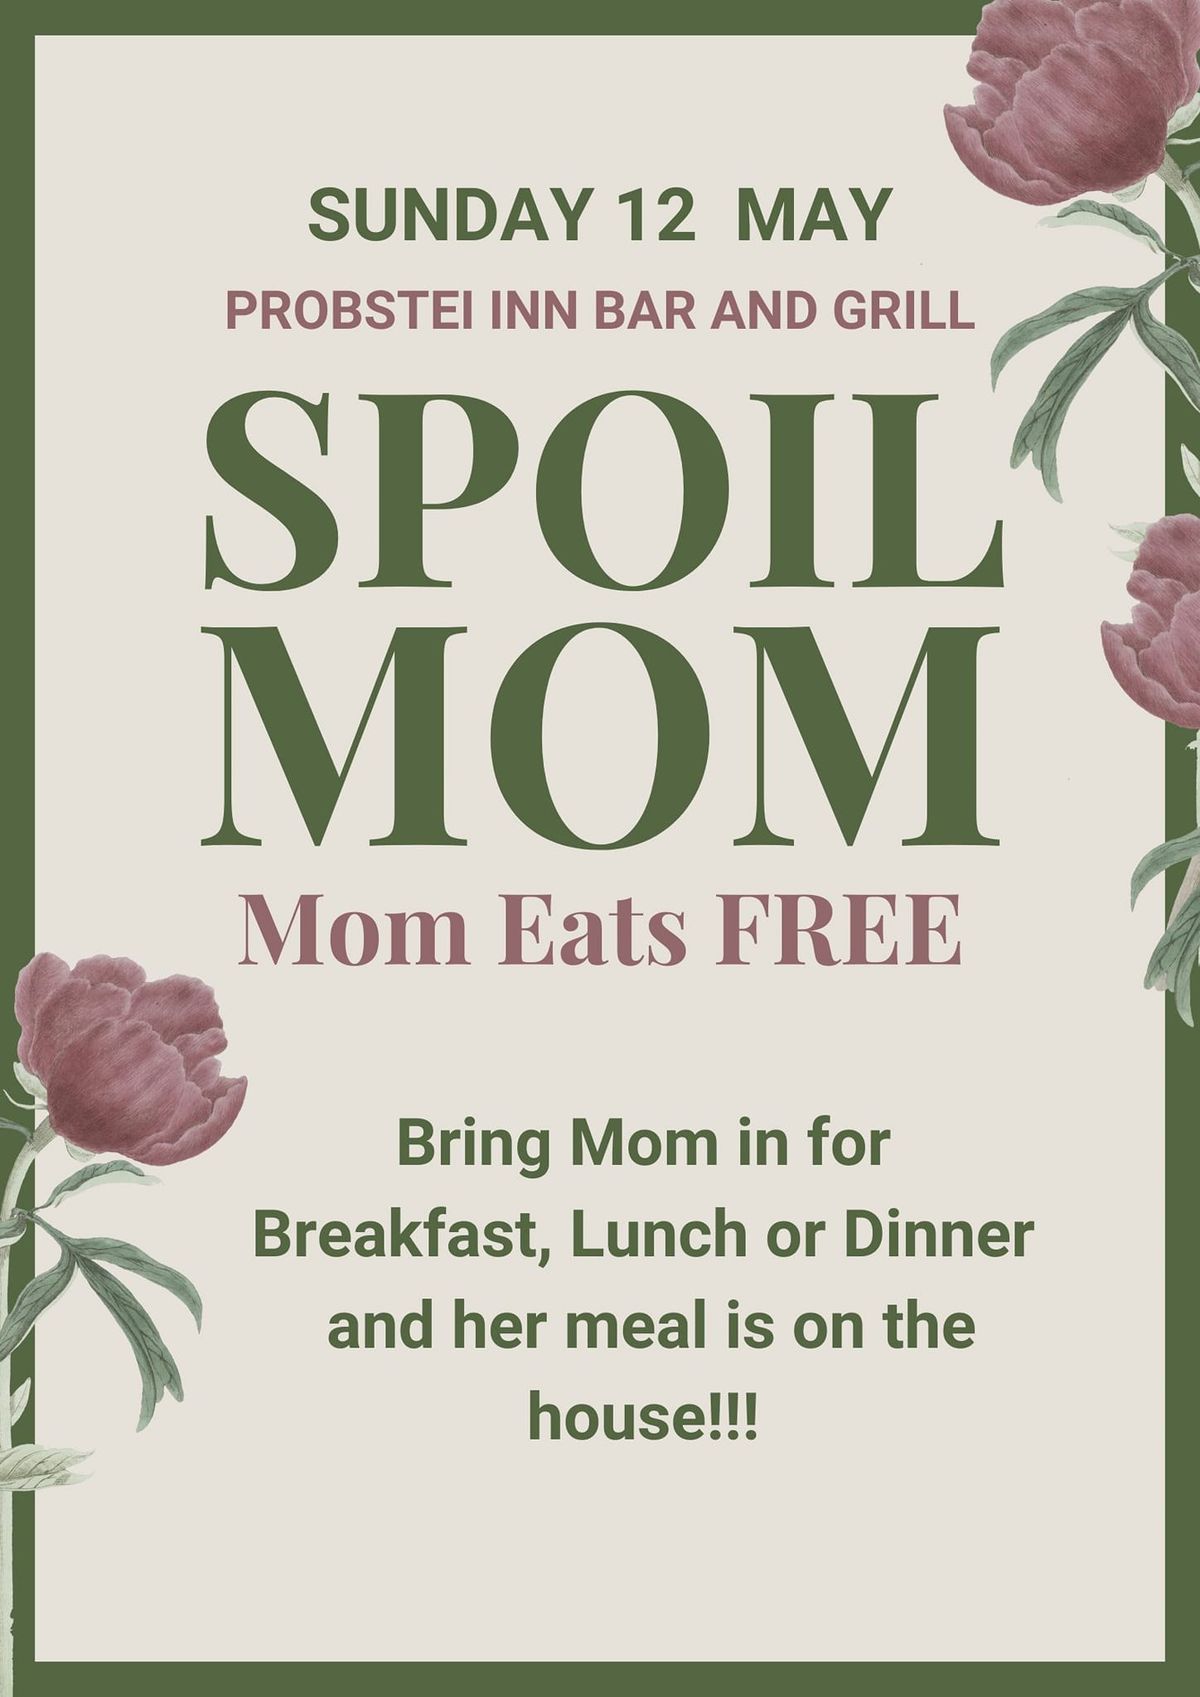 Mom Eats FREE Mothers Day